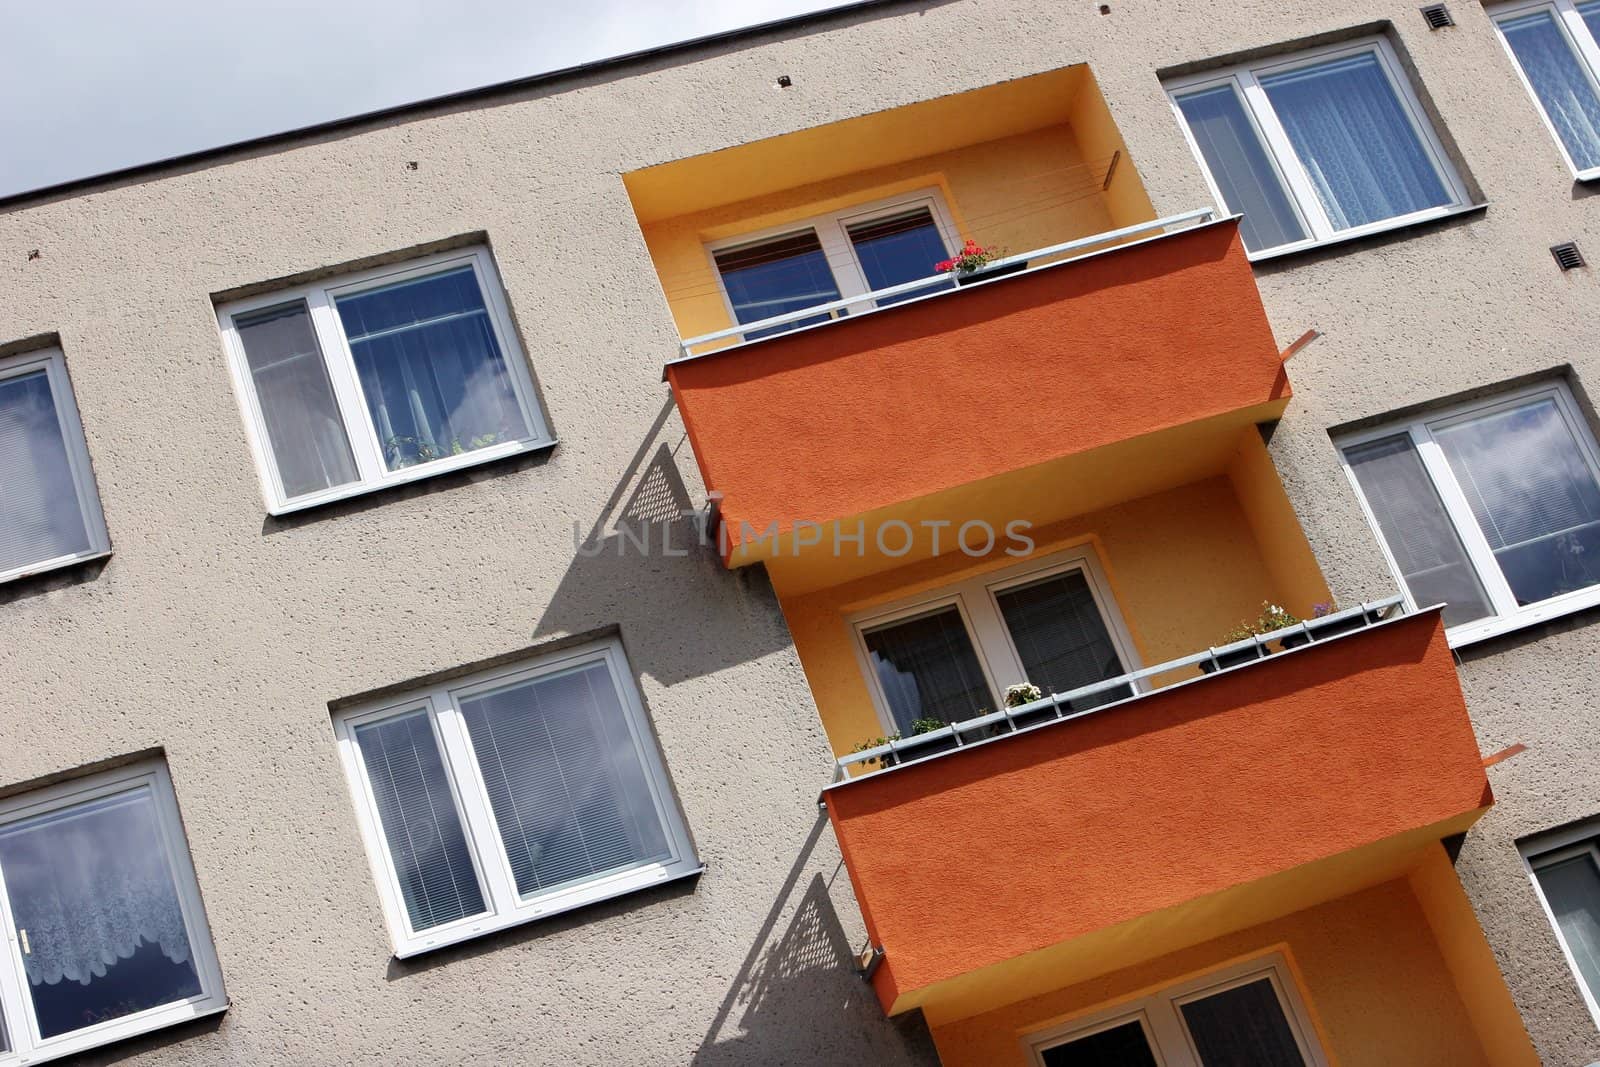 Detail of orange and yellow prefab house